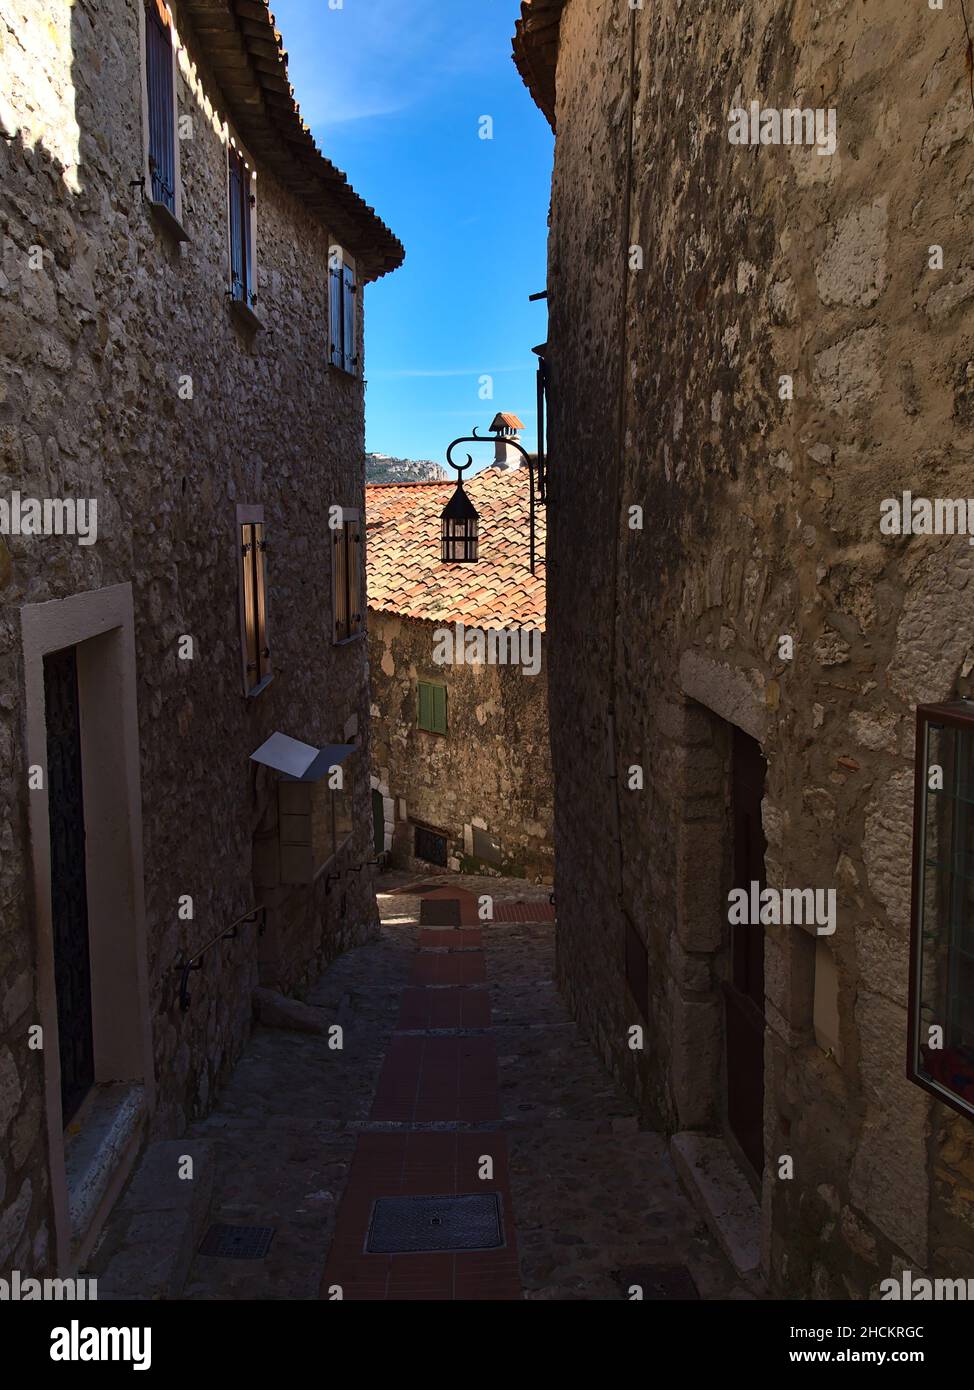 Beautiful view of a narrow, empty alley between traditional stone houses in the historic center of small village Eze at the French Riviera. Stock Photo